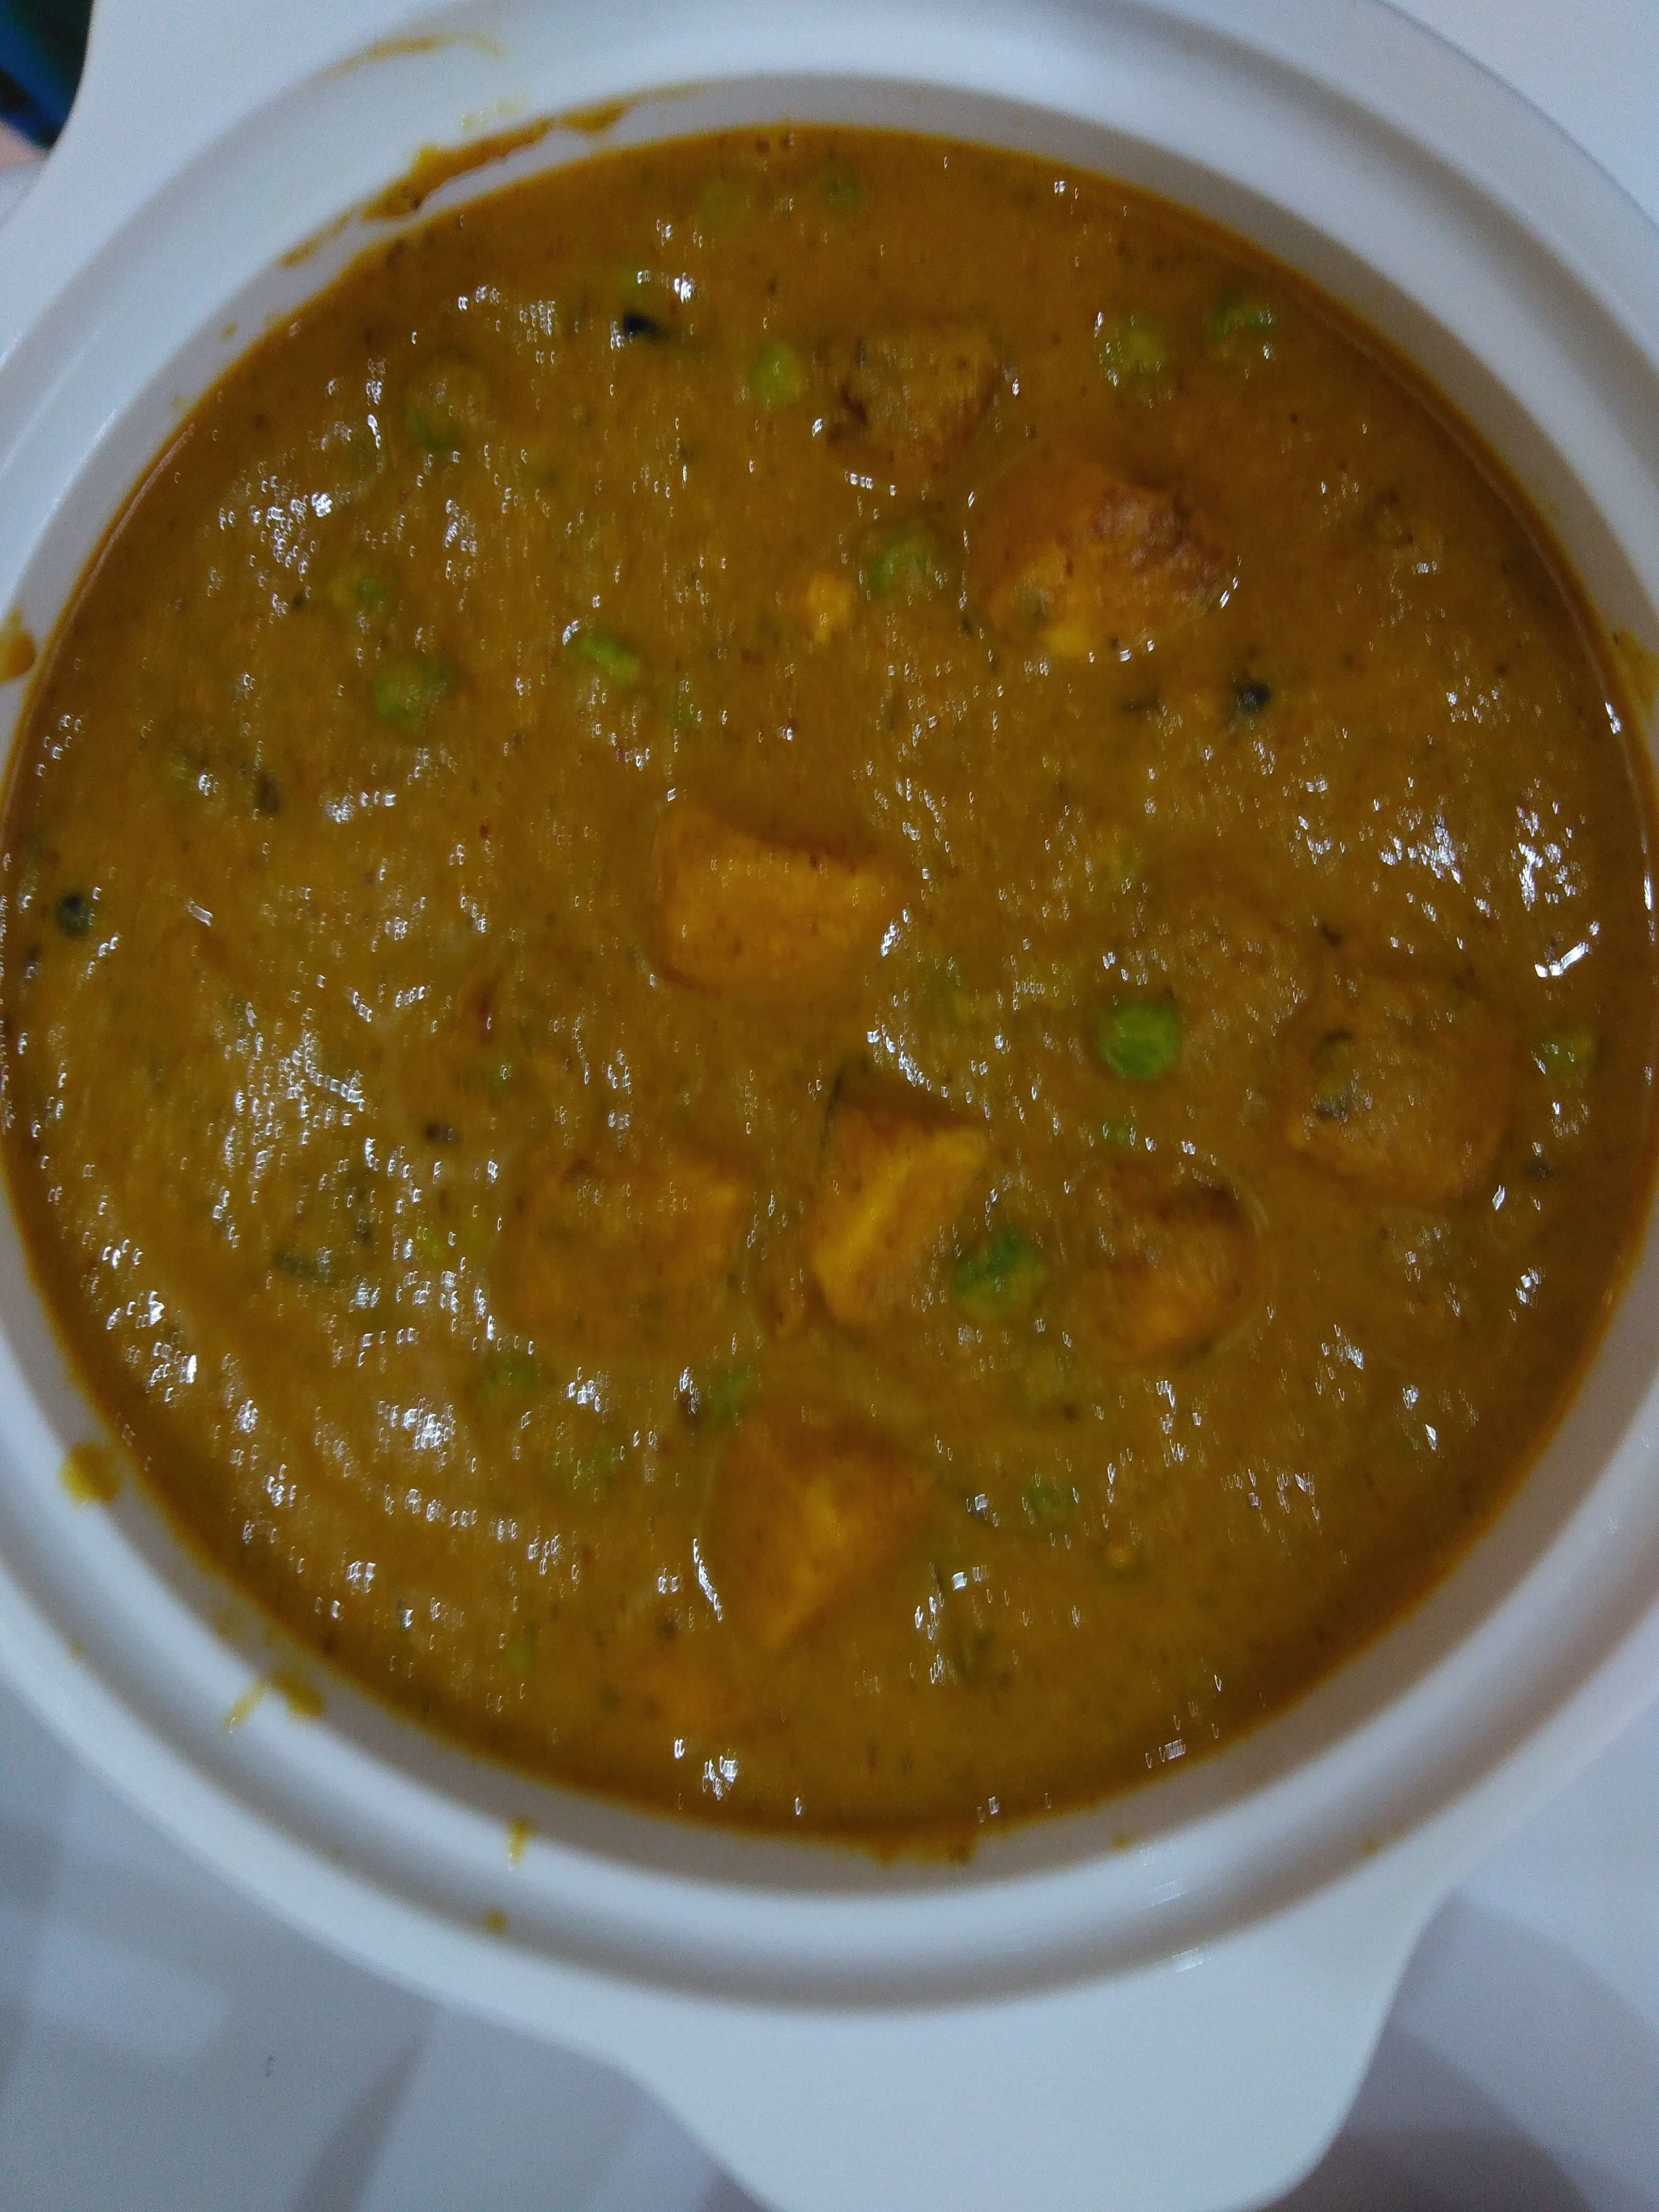 Tasty Matar Paneer cooked by COOX chefs cooks during occasions parties events at home